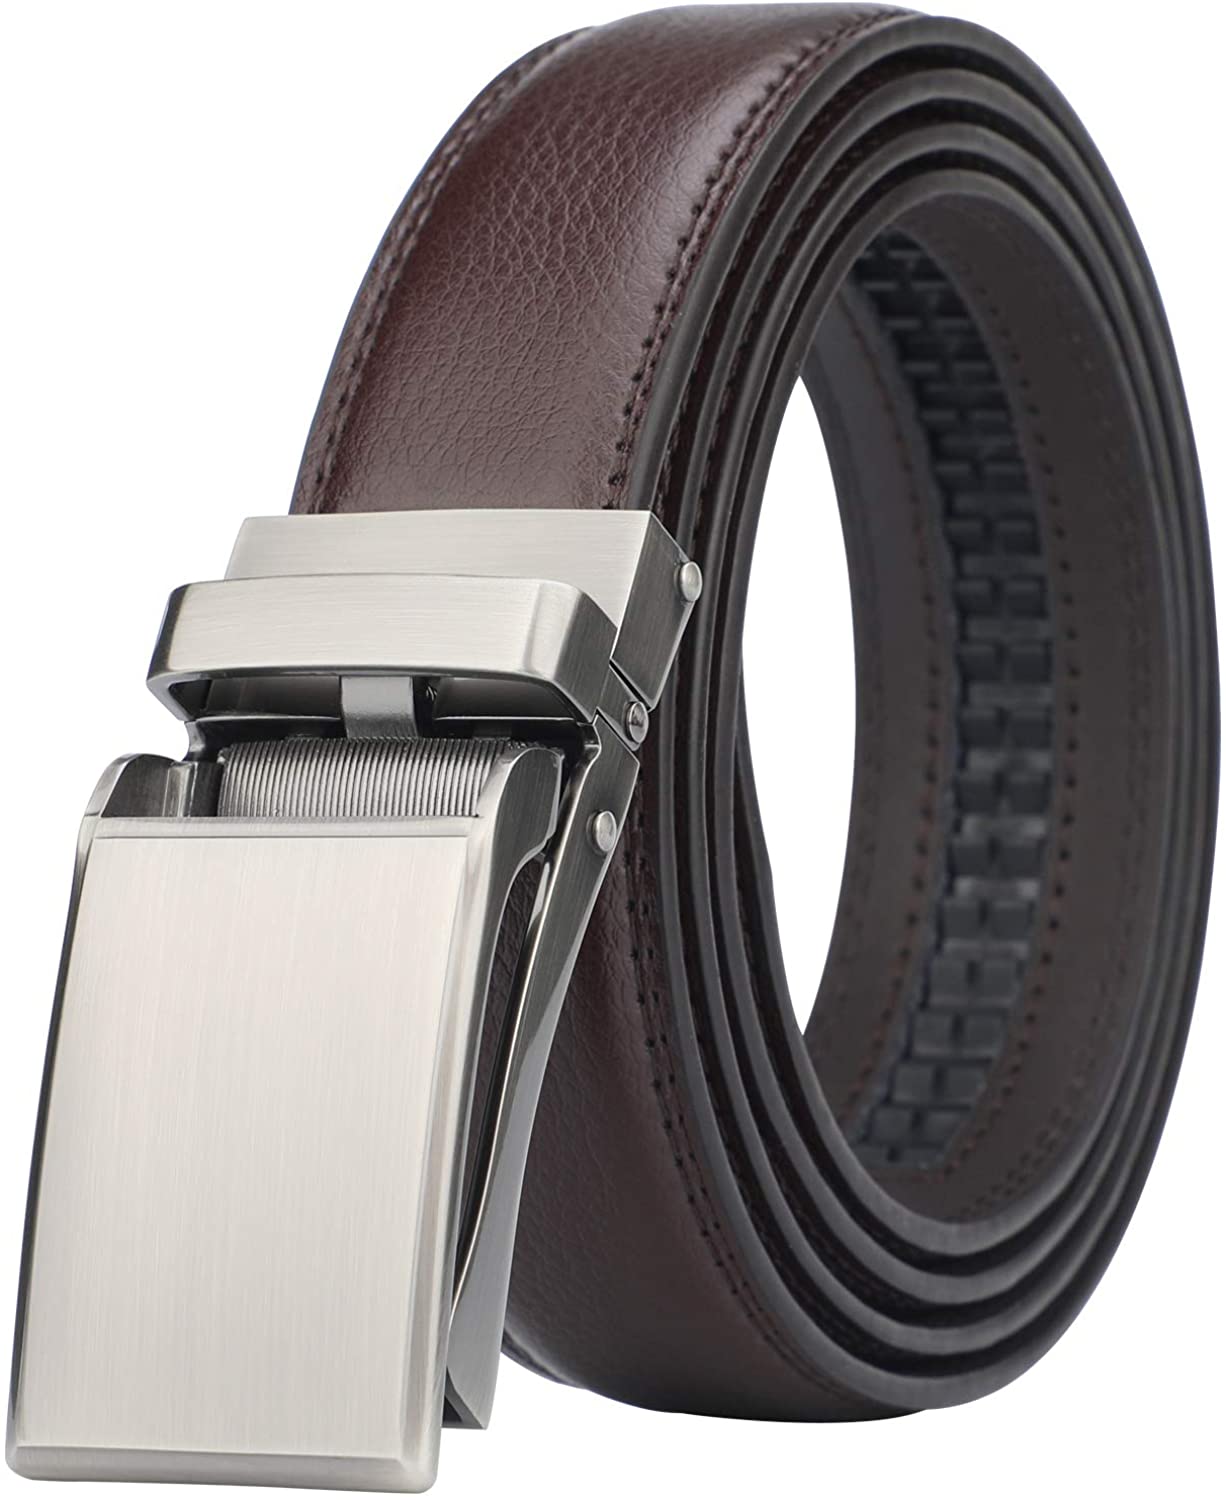 HIMI Mens Comfort Genuine Leather Ratchet Dress Belt with Automatic Click Buckle